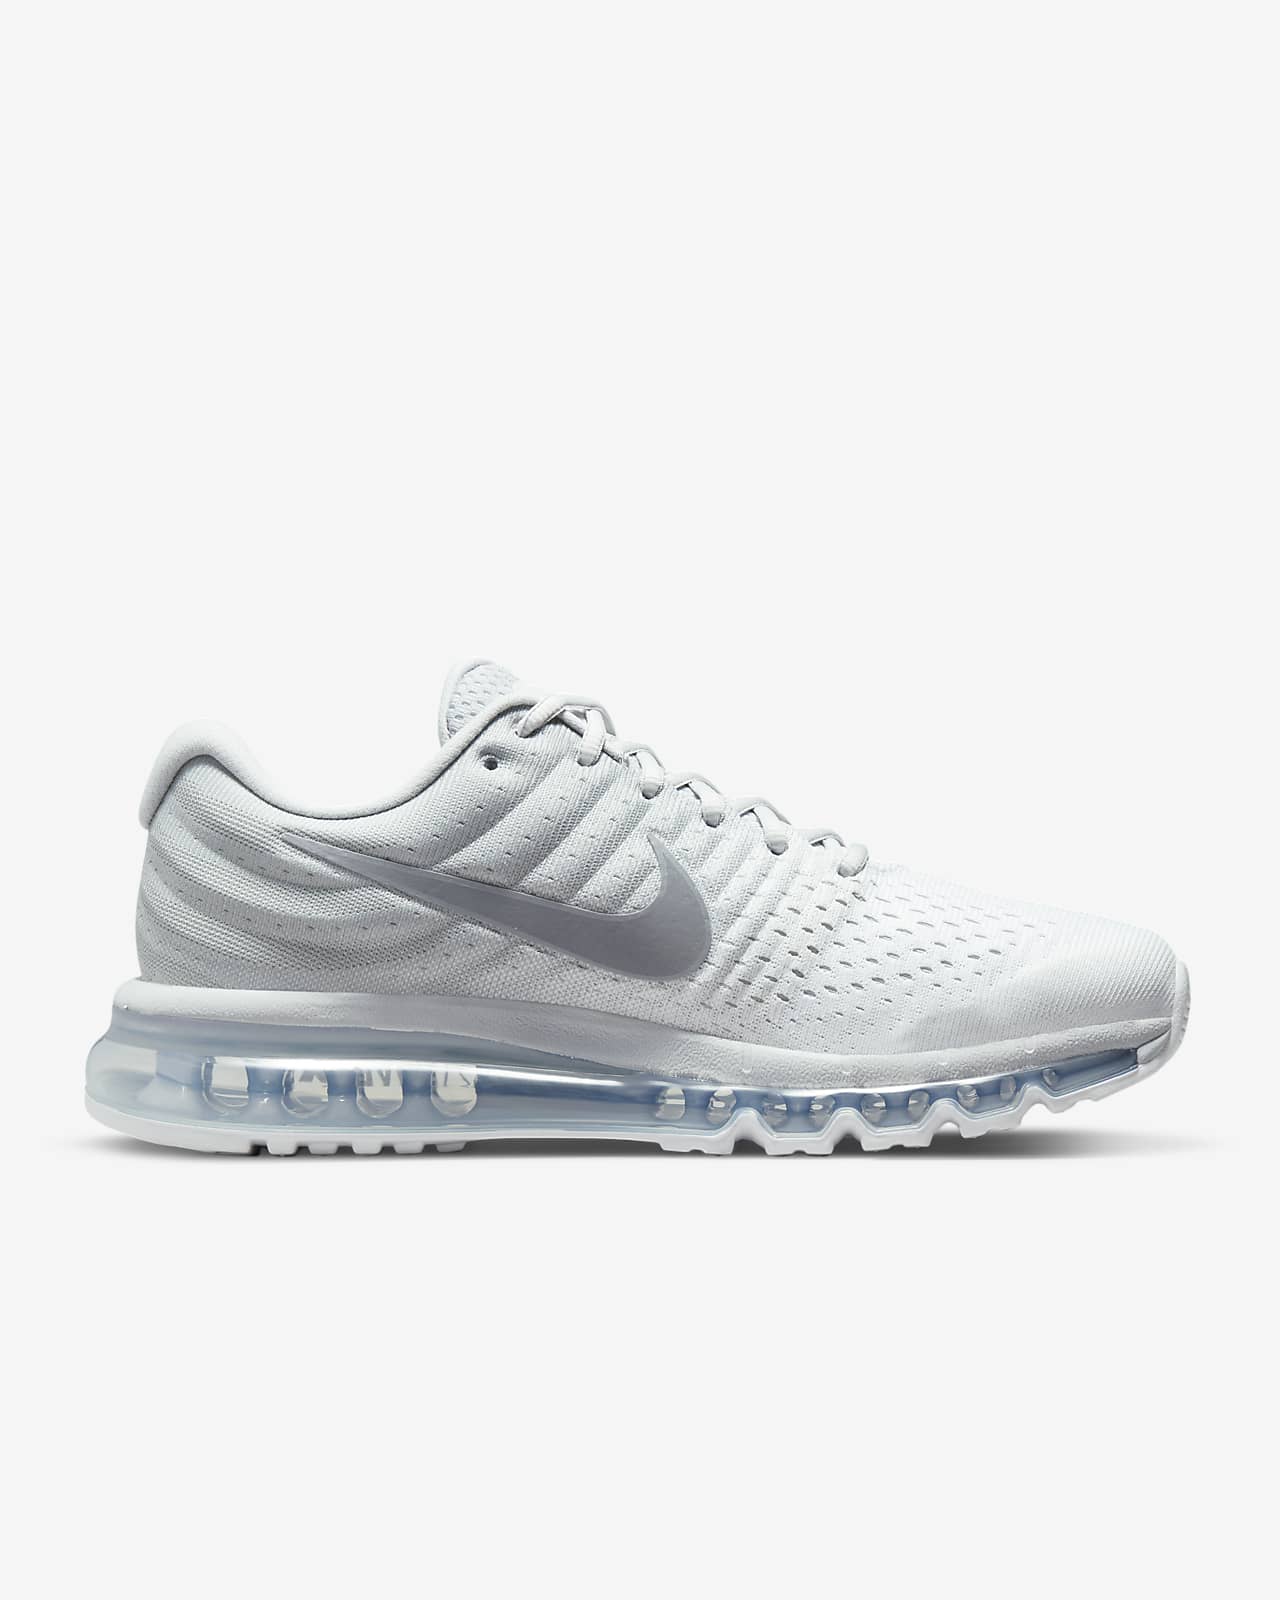 Hollywood Go up Onlooker Nike Air Max 2017 Men's Shoes. Nike.com